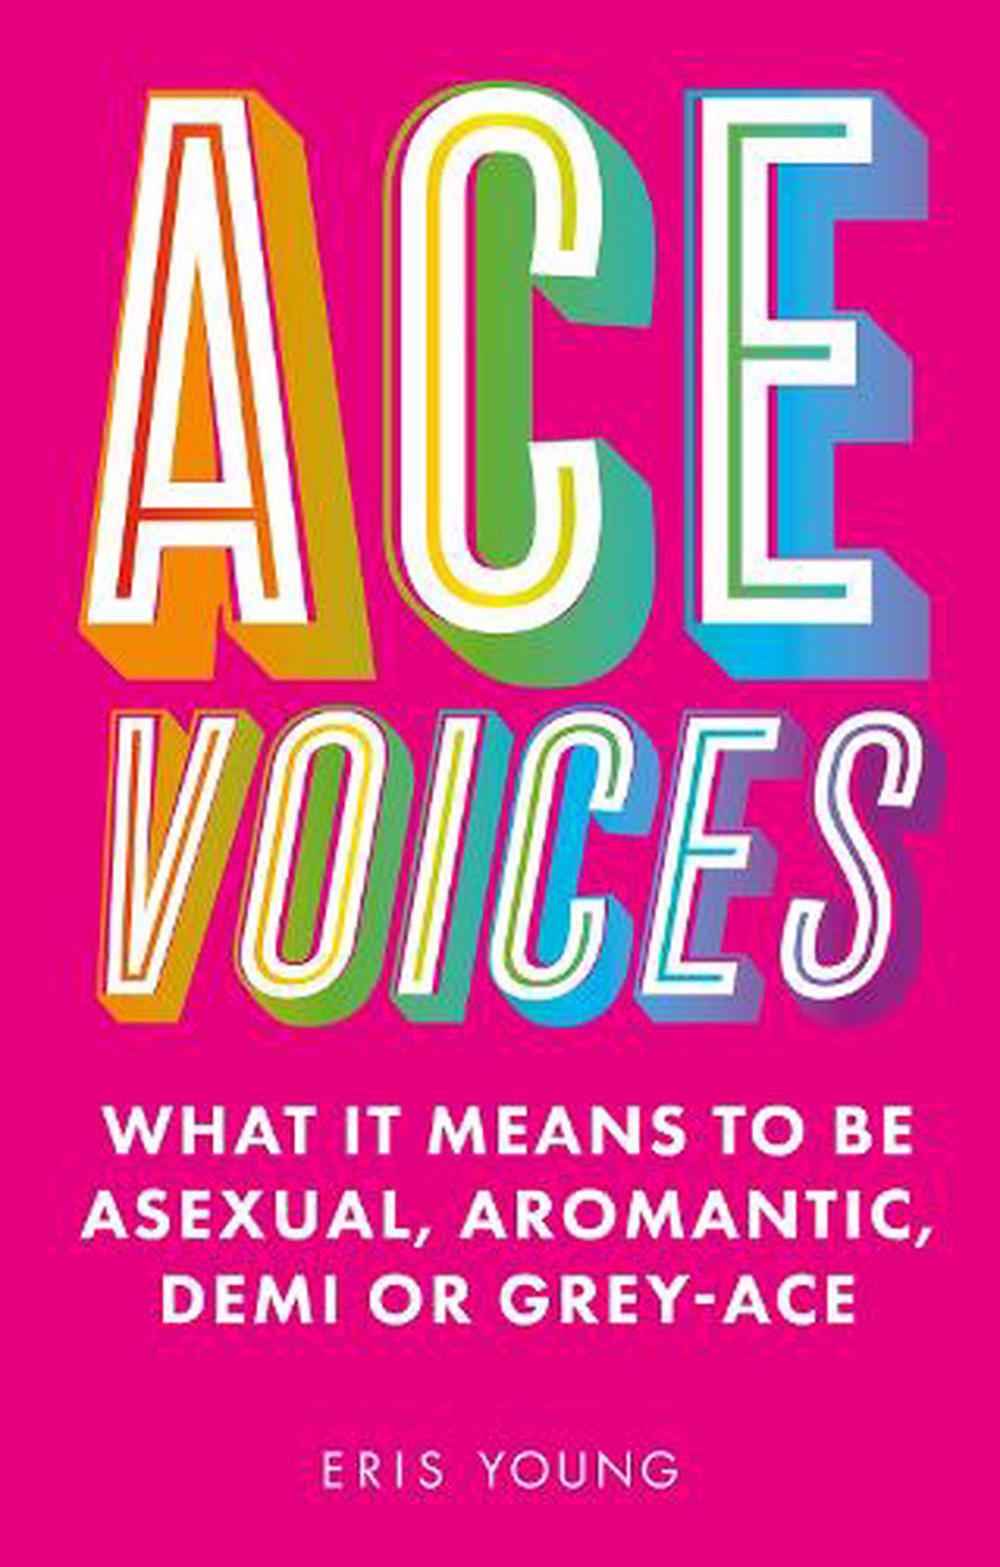 Ace Voices What It Means To Be Asexual Aromantic Demi Or Grey Ace By Eris Young Paperback 